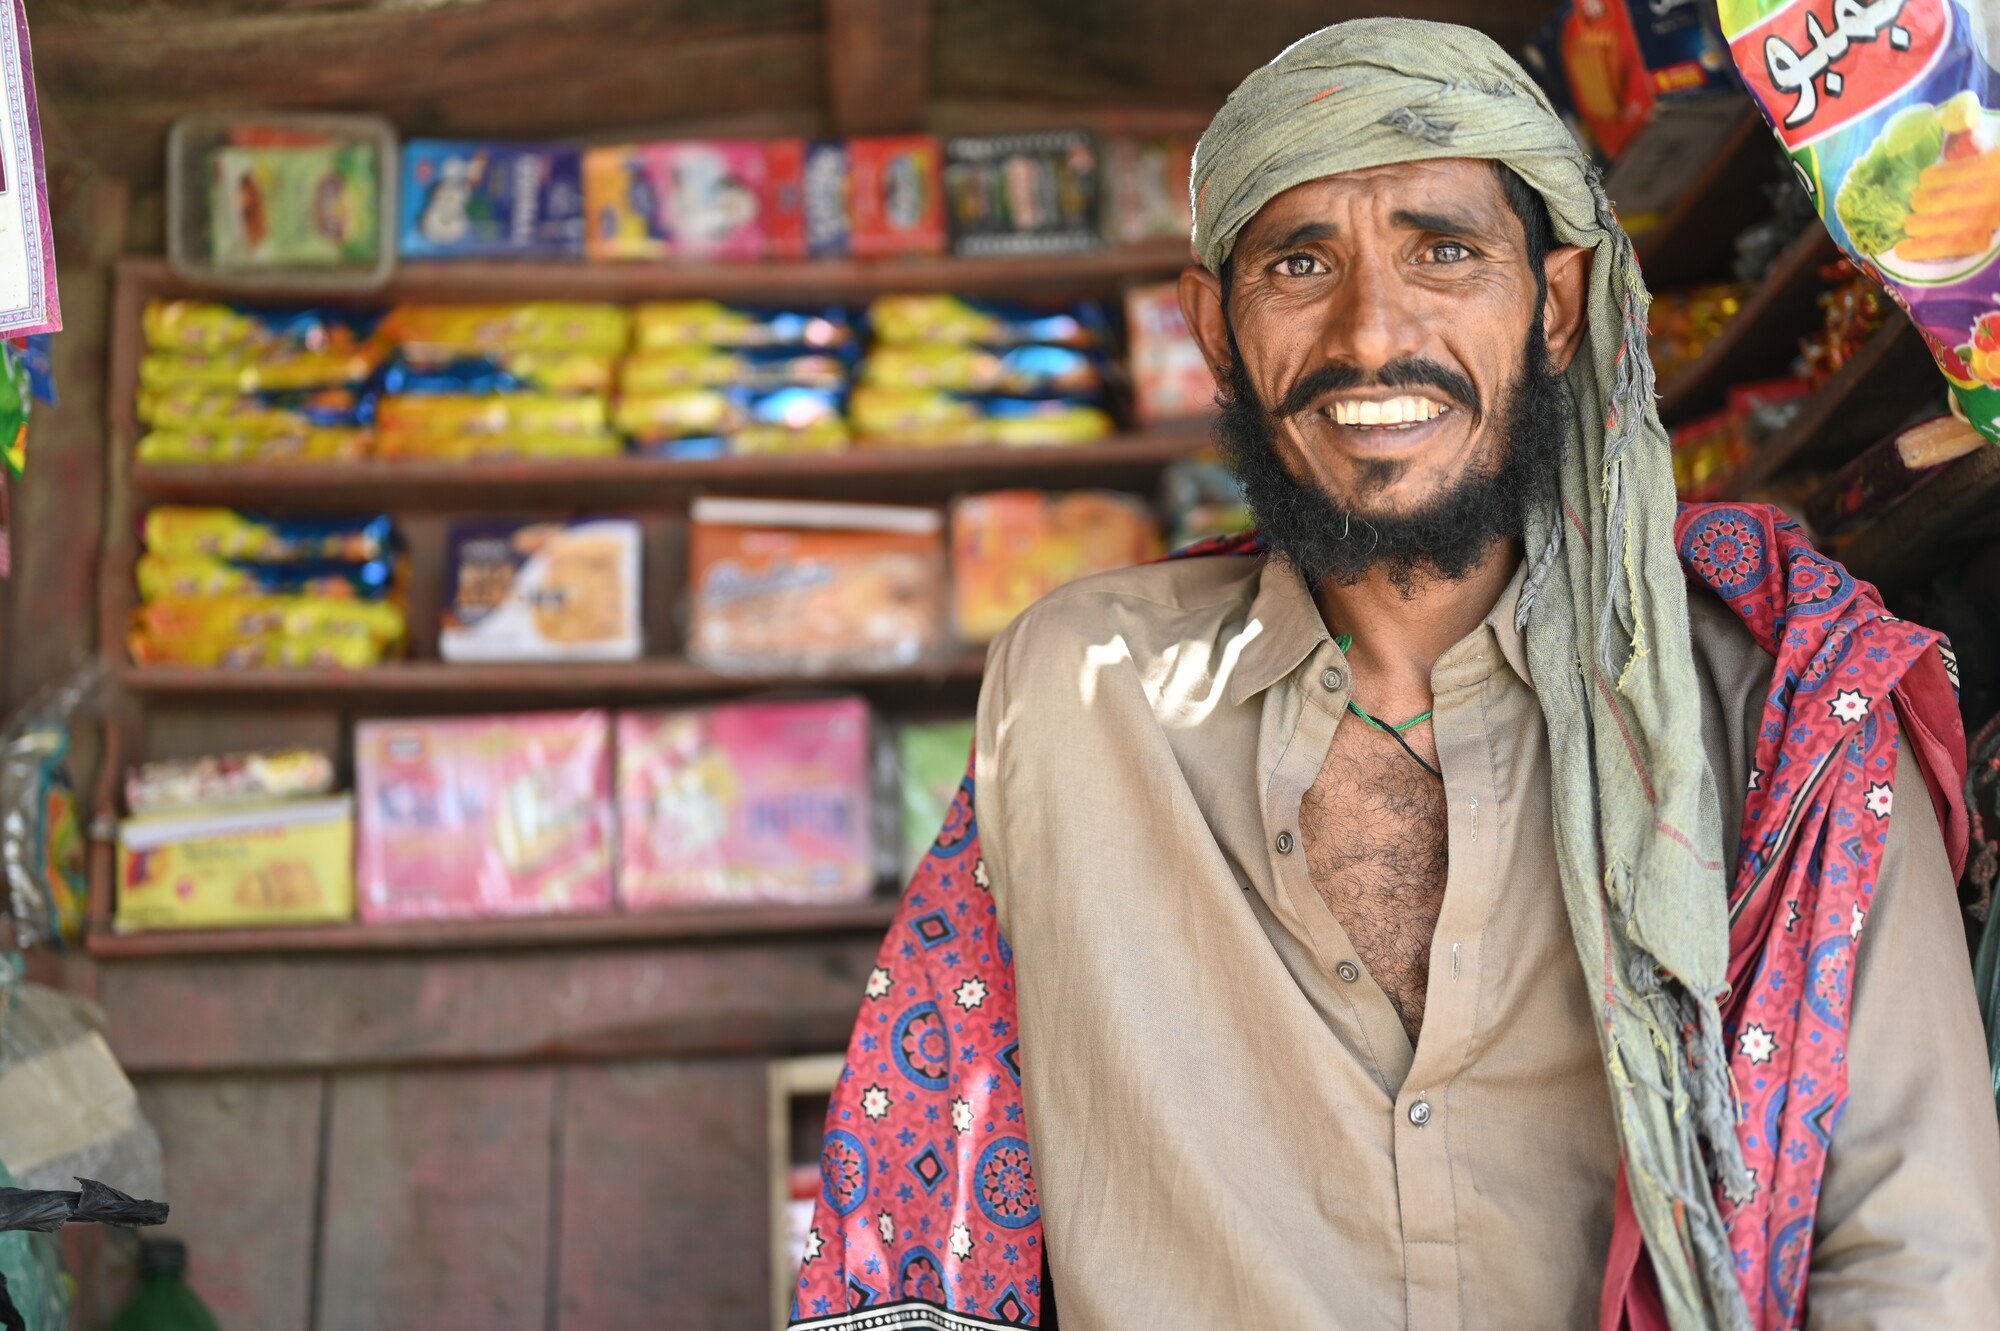 Ghulam Mustafa used cash provided to him by the Strengthening Participatory Organization to open a shop. The shop is doing well and he expects to cover the education costs of his children and expand his retail operation in the future. Tooba Niazi/Oxfam